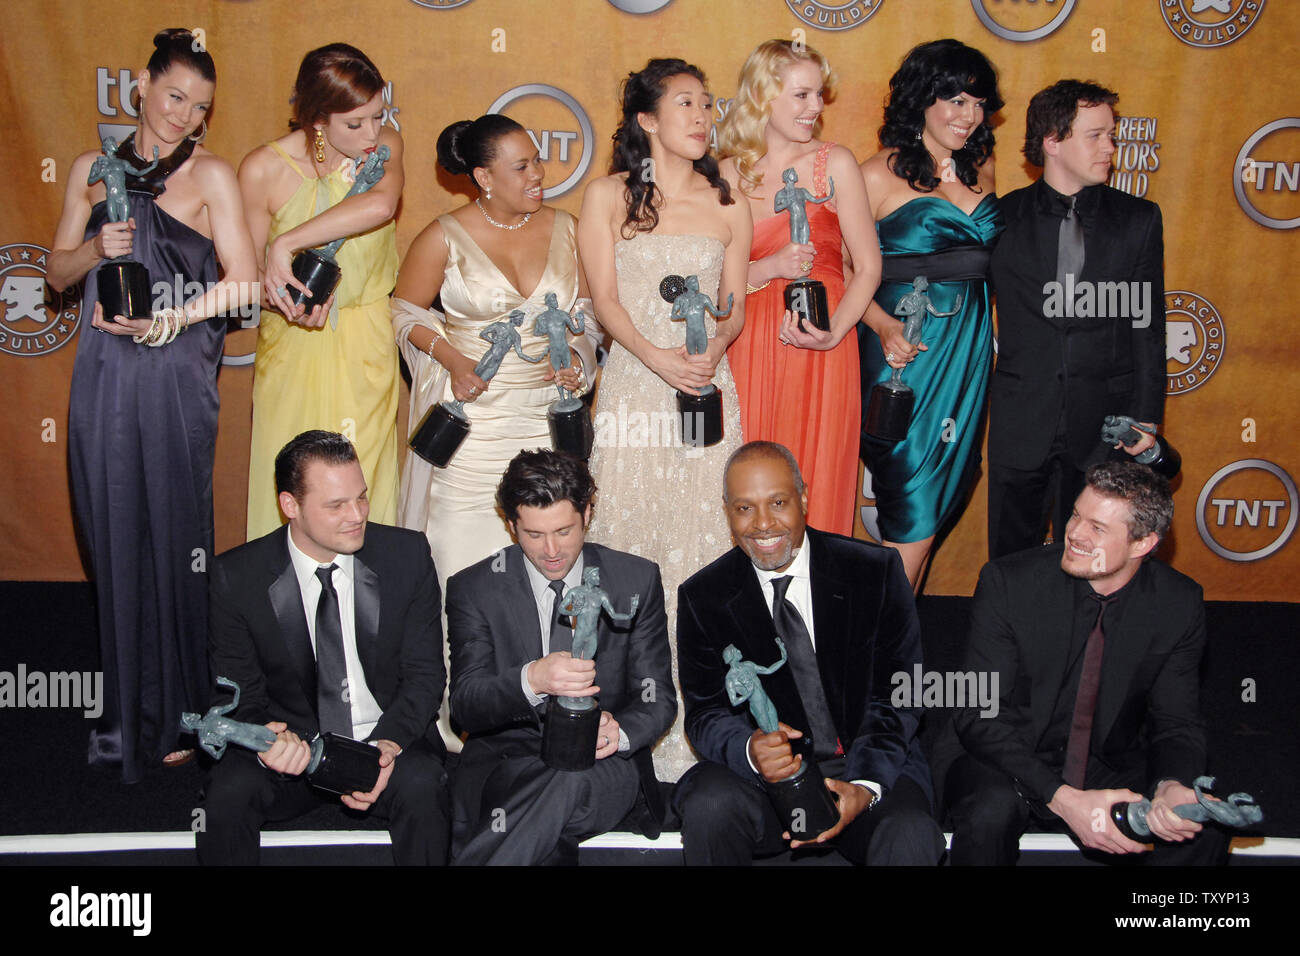 'Grey's Anatomy' cast, (L-R top row) Ellen Pompeo, Kate Walsh, Chandra Wilson, Sandra Oh, Katherine Hiegl, Sara Ramirez, T.R. Knight, (L-R bottom row), Justin Chambers, Patrick Dempsey, James Pickens, Jr. and Eric Dane appear with their awards backstage at the 13th Annual Screen Actors Guild Awards in Los Angeles on January 28, 2007. (UPI Photo/Jim Ruymen) Stock Photo